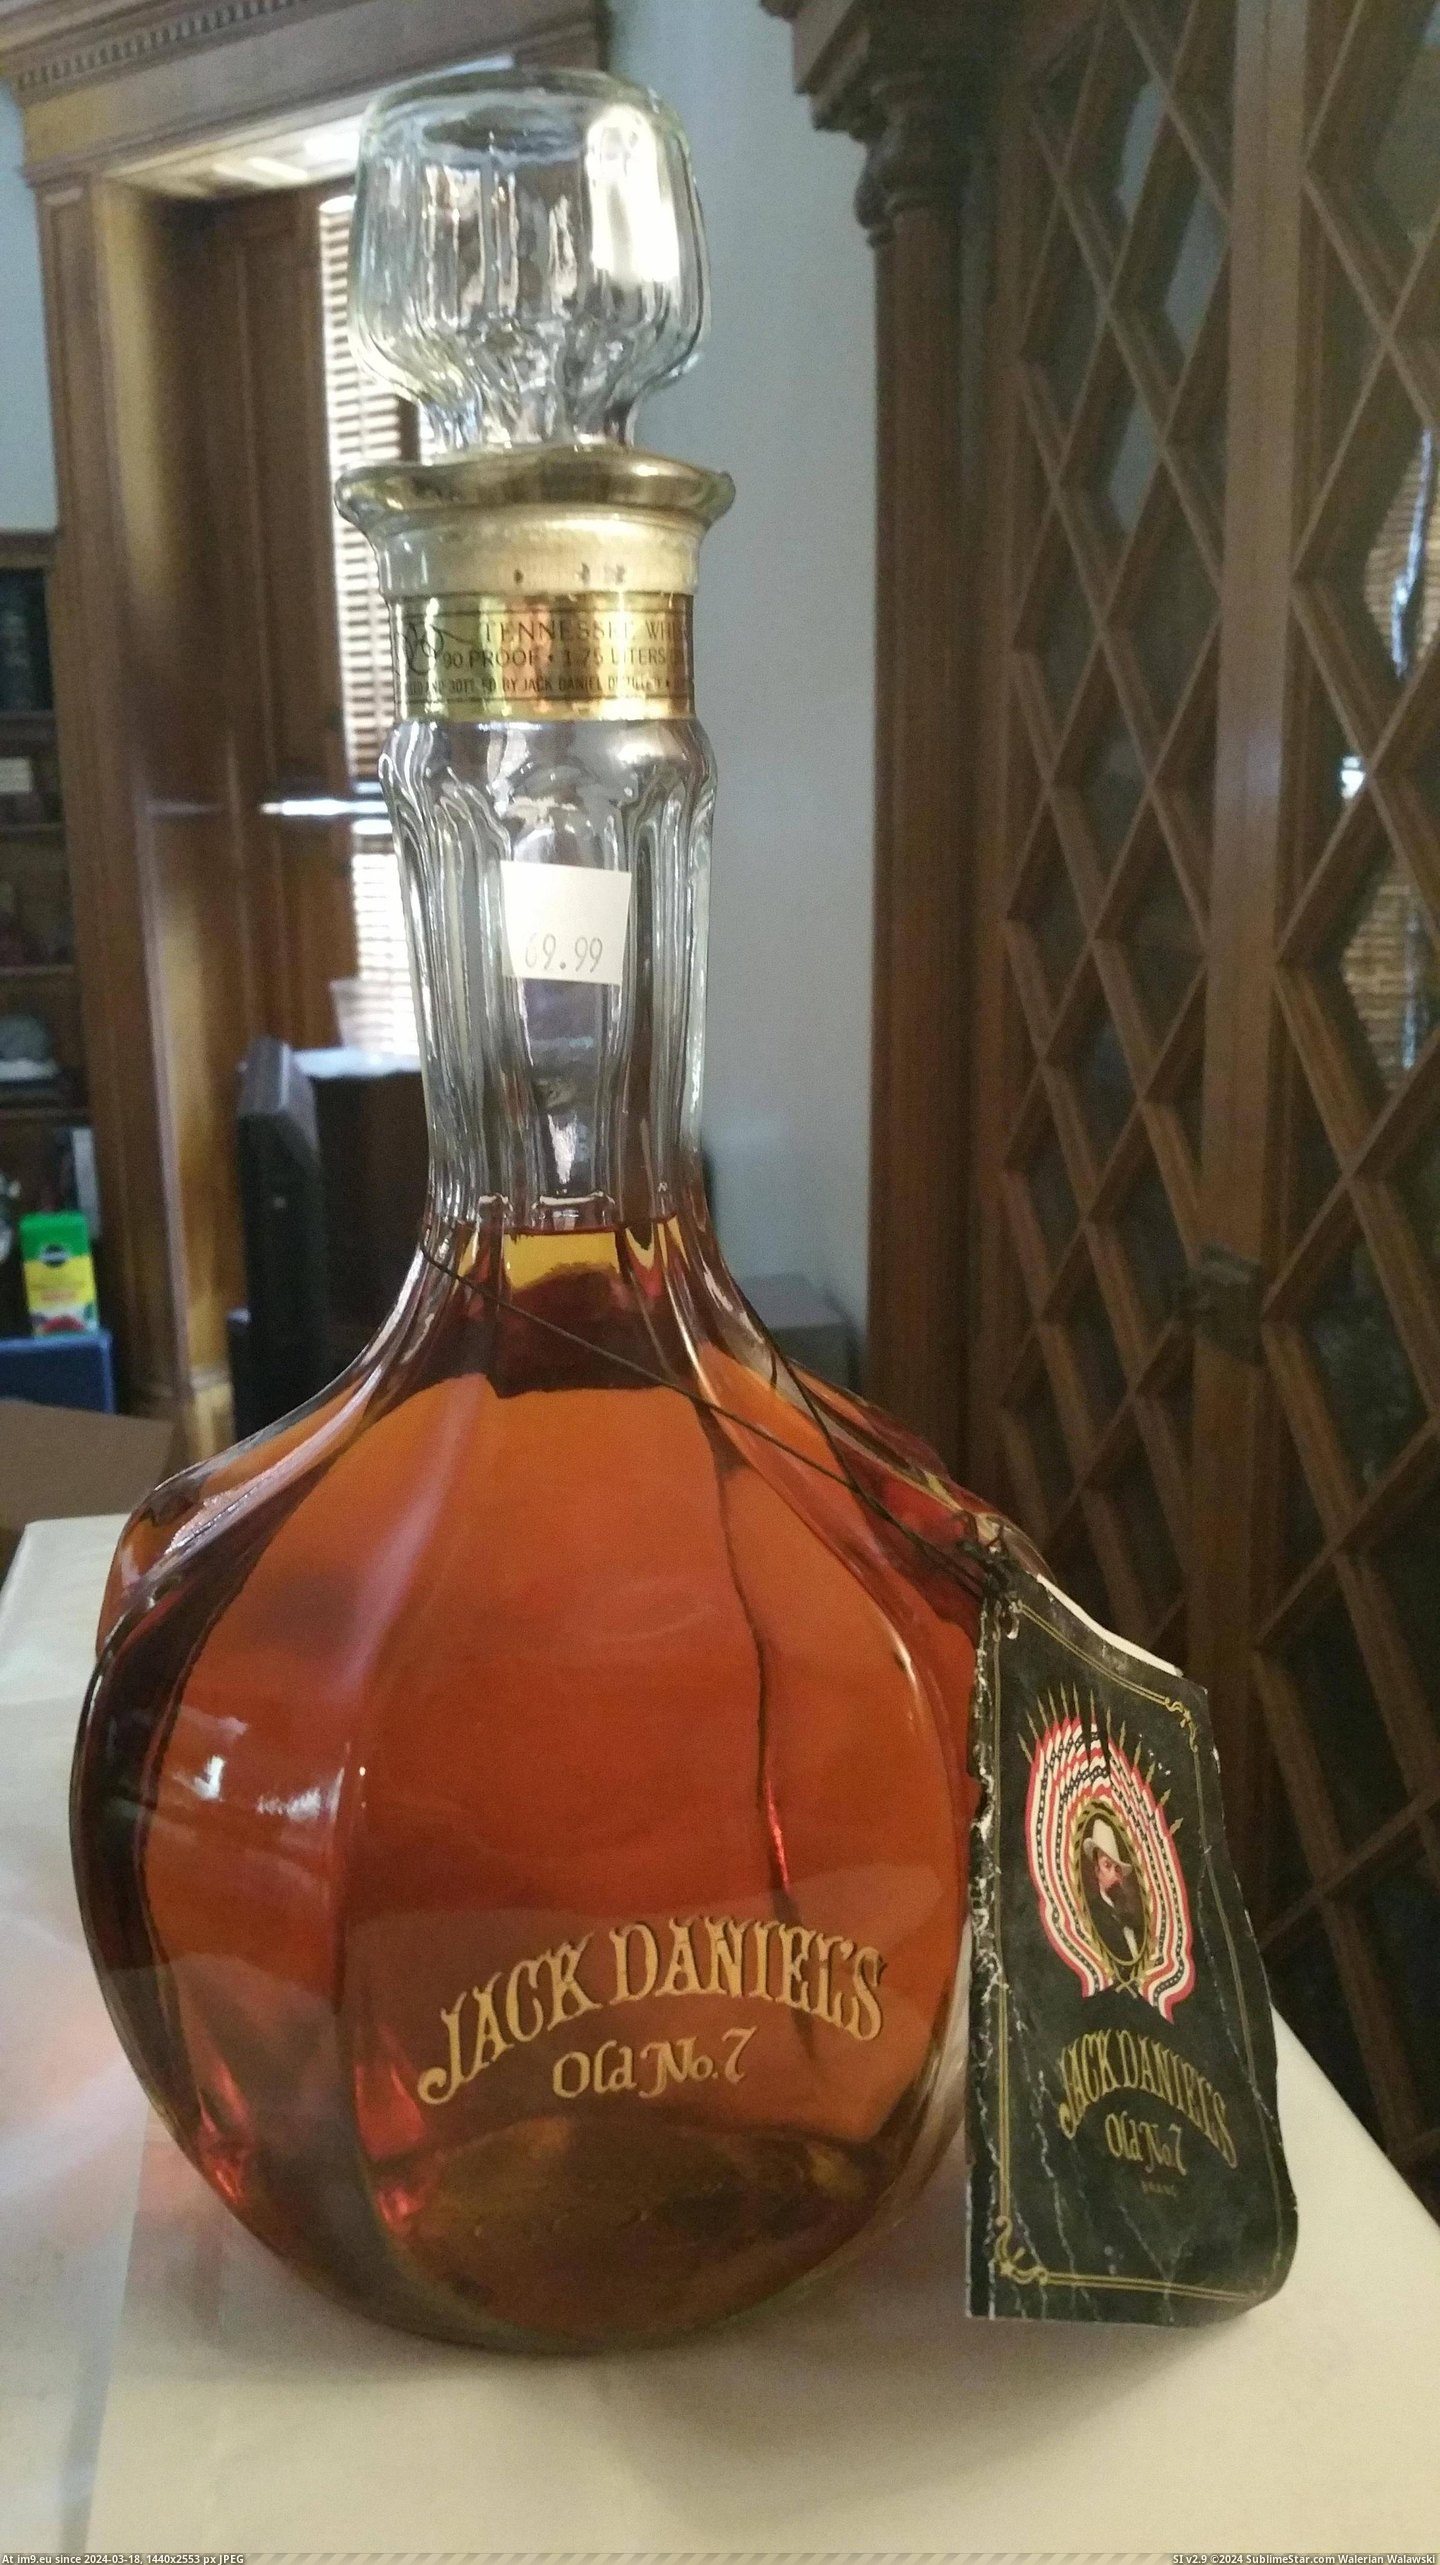 #Wife #Store #Office #Owner #Liquor #Passed #Stuck #Price [Pics] So the liquor store owner passed, his wife found this stashed back in the office, put a price on it($69.99), and stuck it Pic. (Bild von album My r/PICS favs))